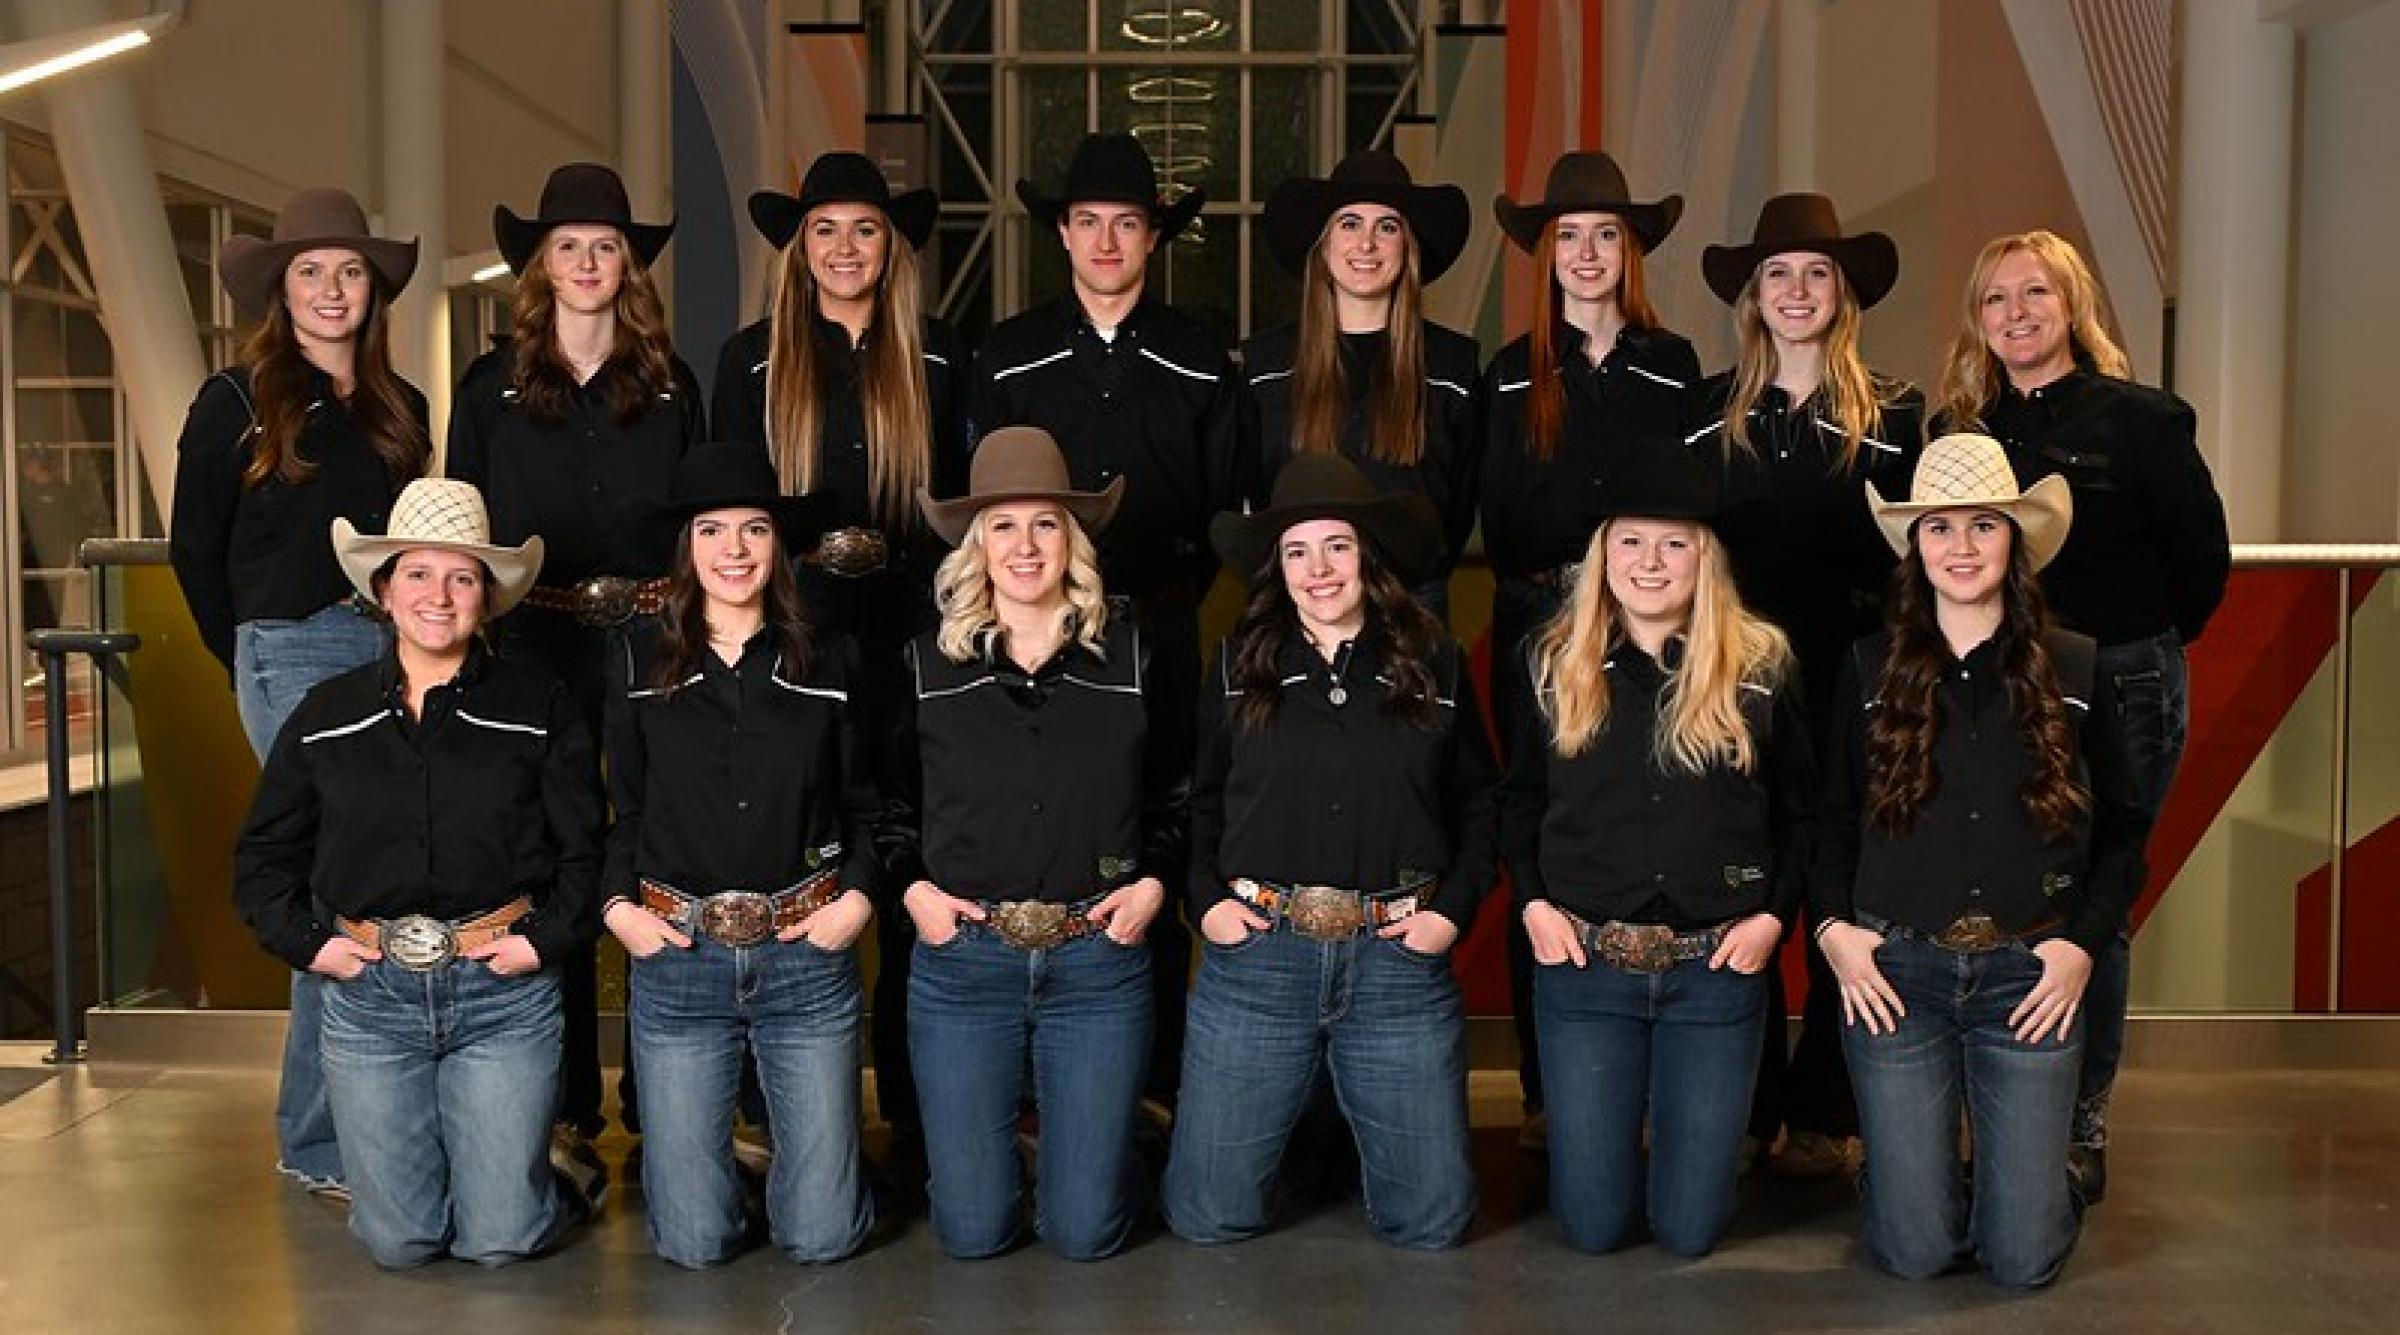 A group picture of RDP's Rodeo Team including men and women in traditional western gear